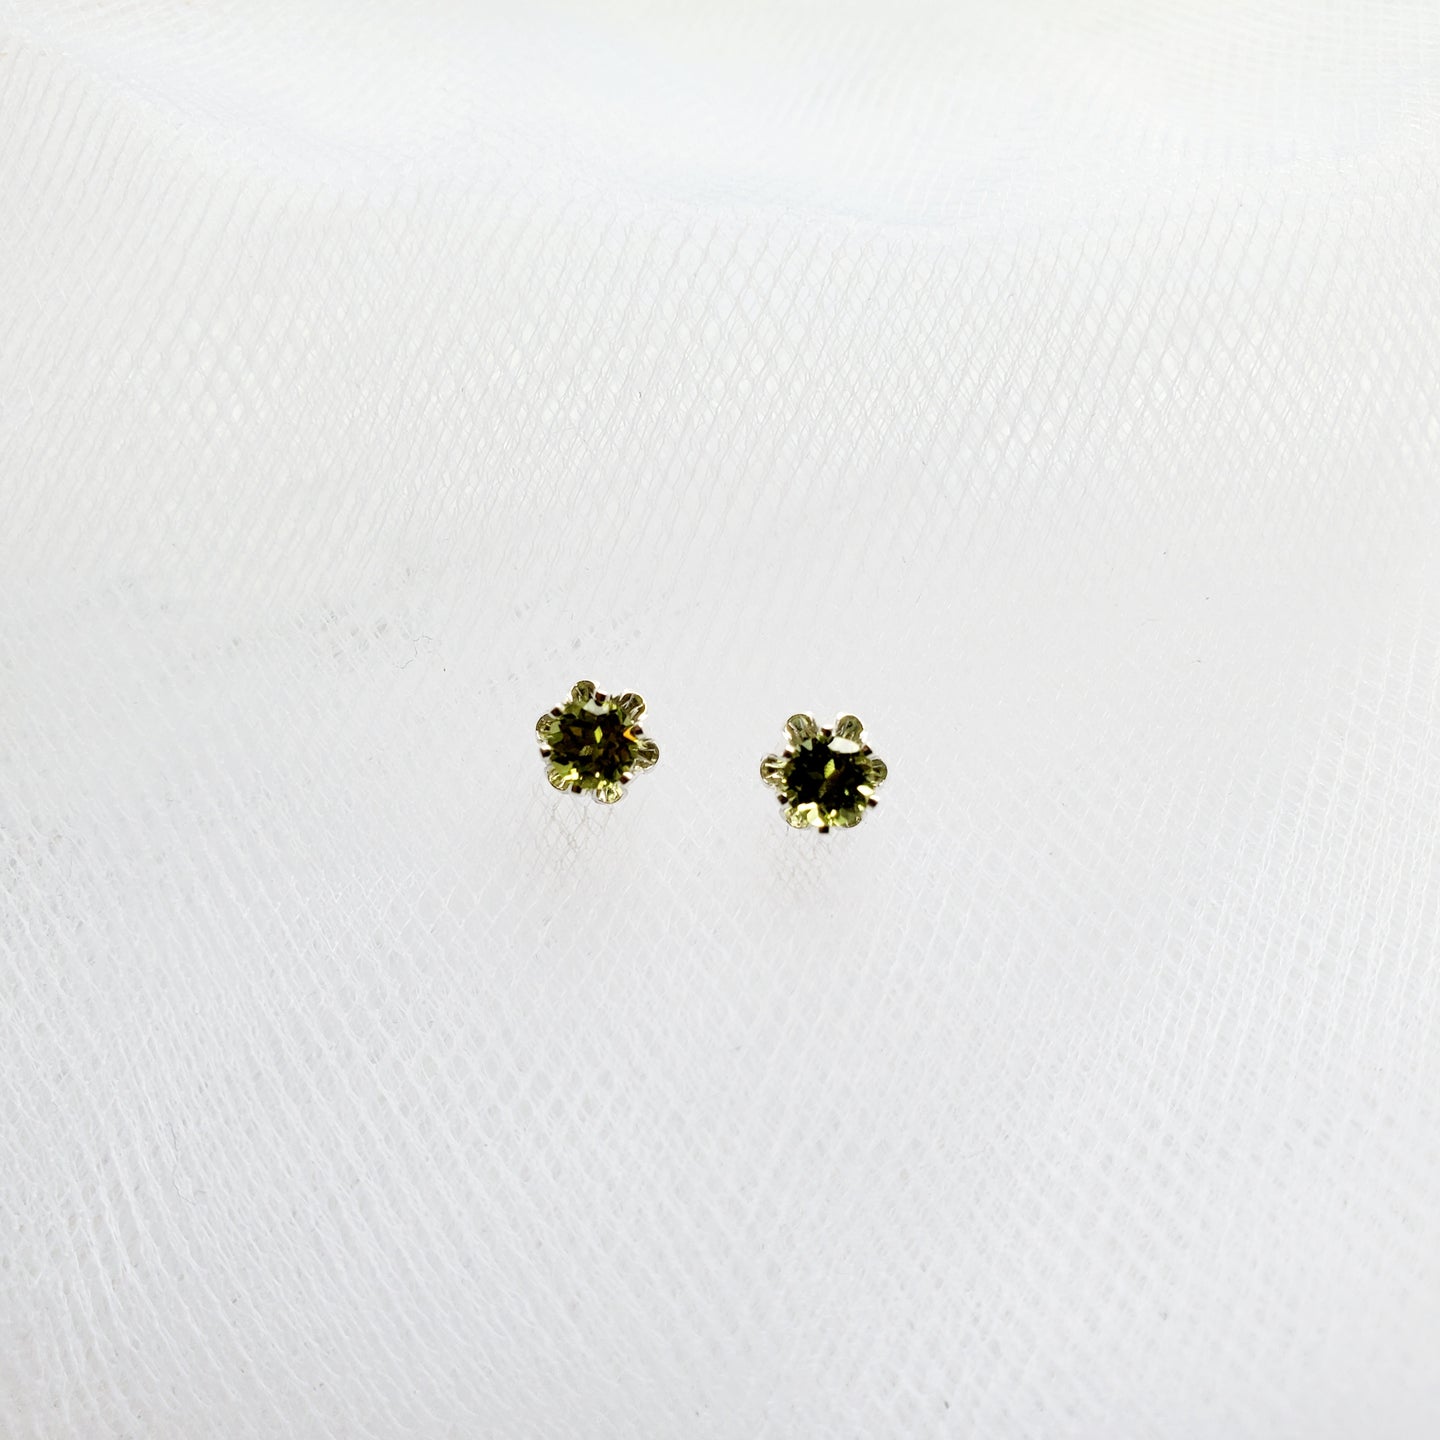 sterling silver buttercup setting stud birthstone earrings with peridots